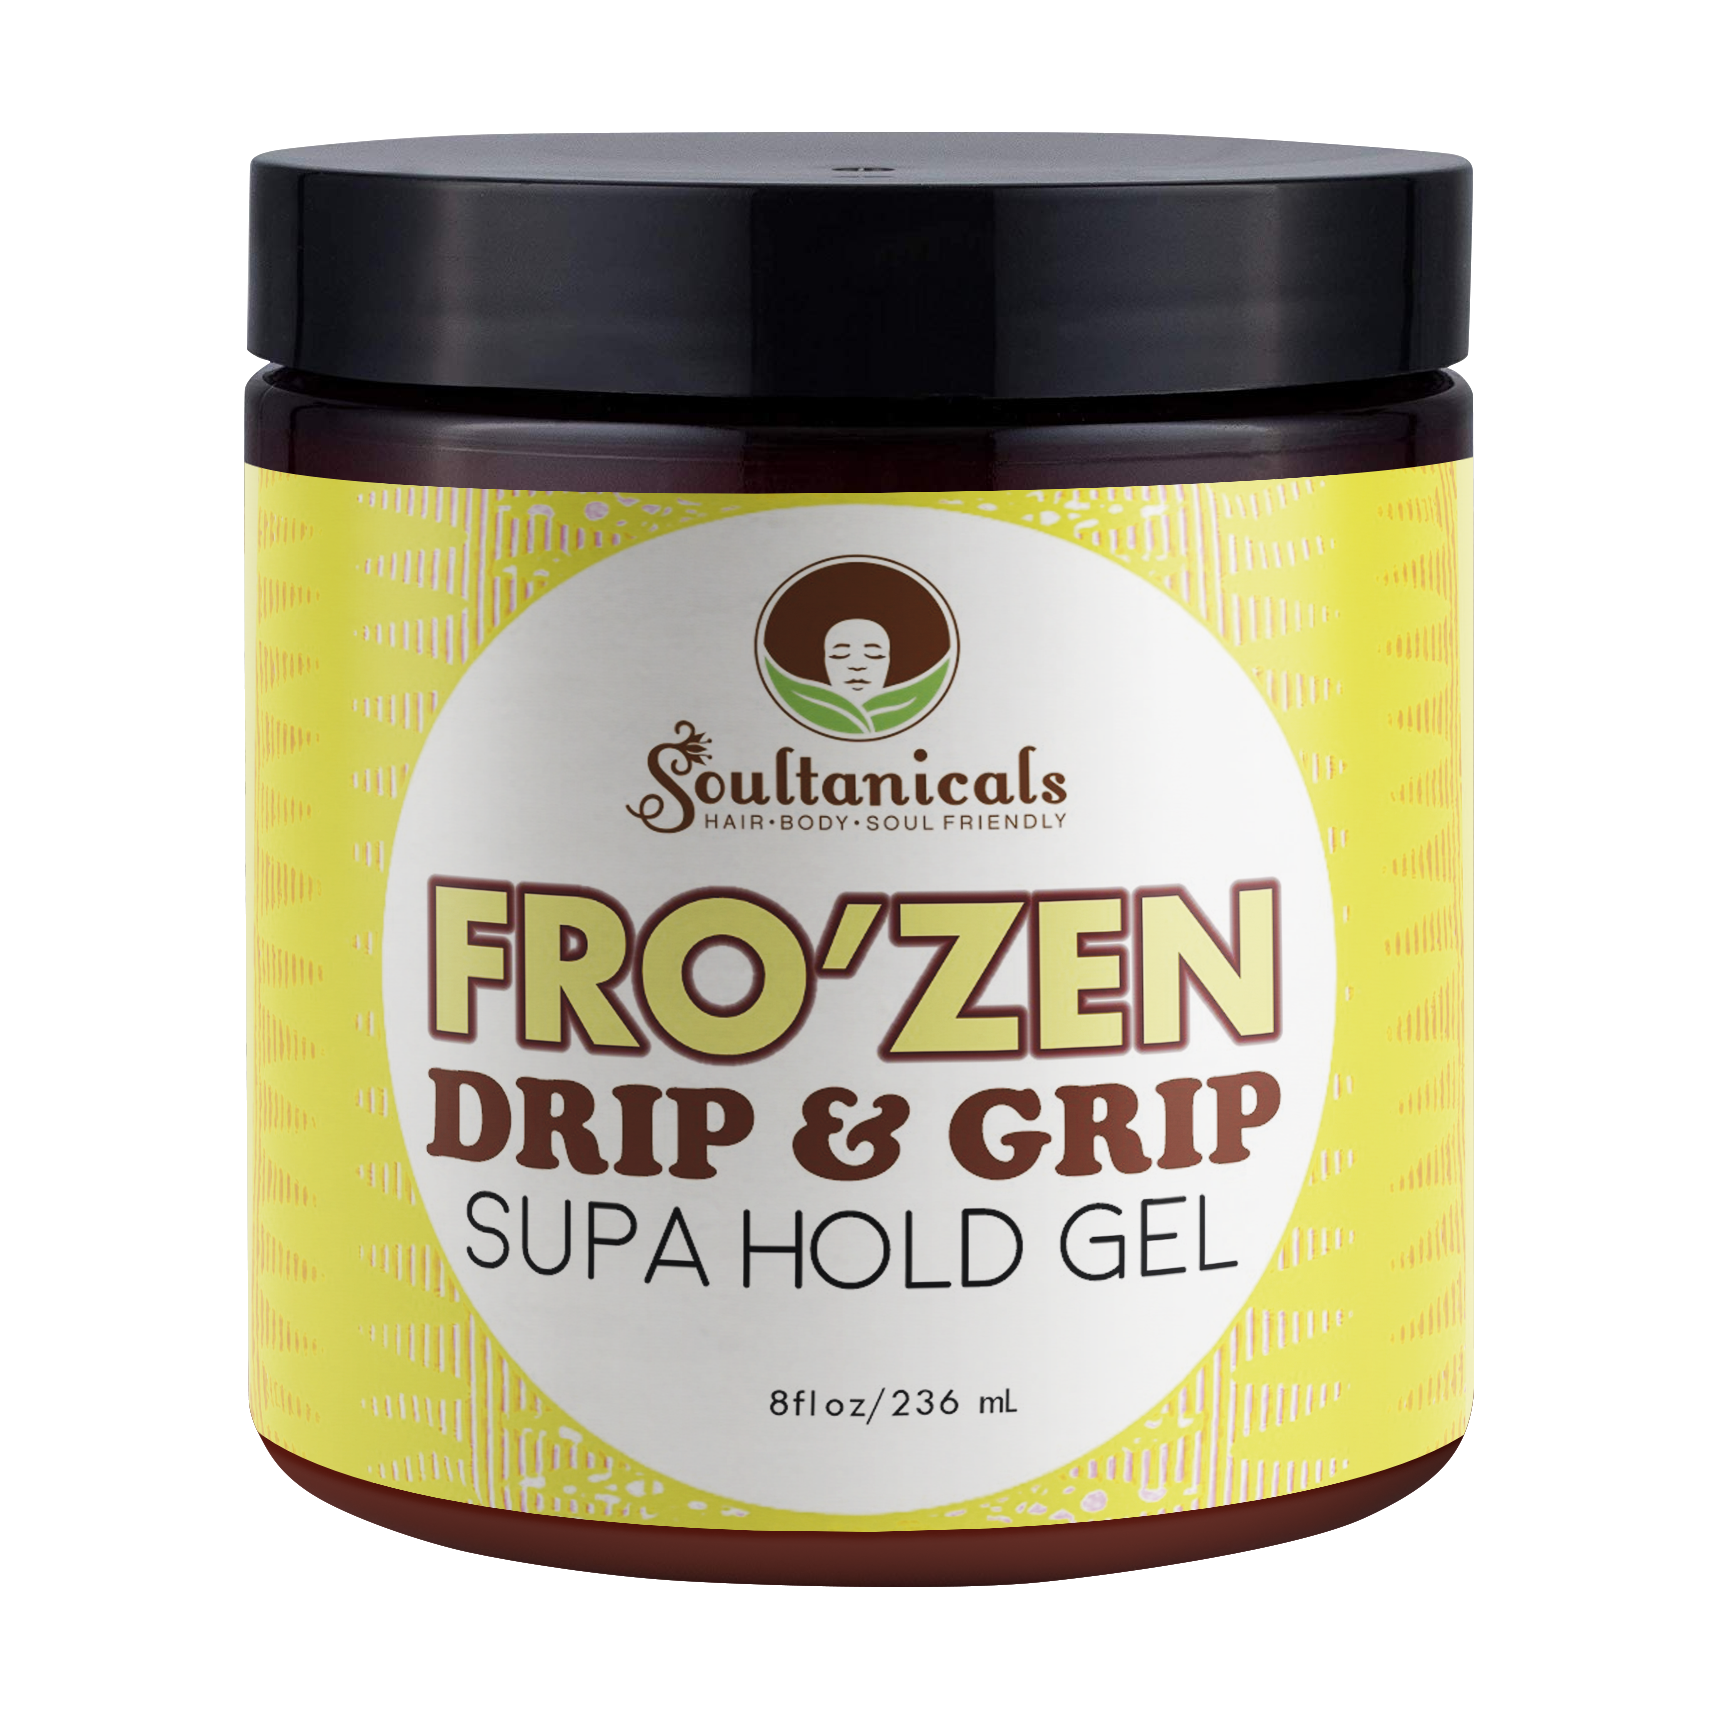 FRO'ZEN- Drip & Grip, Supa Hold Gel- WHOLESALE ONLY